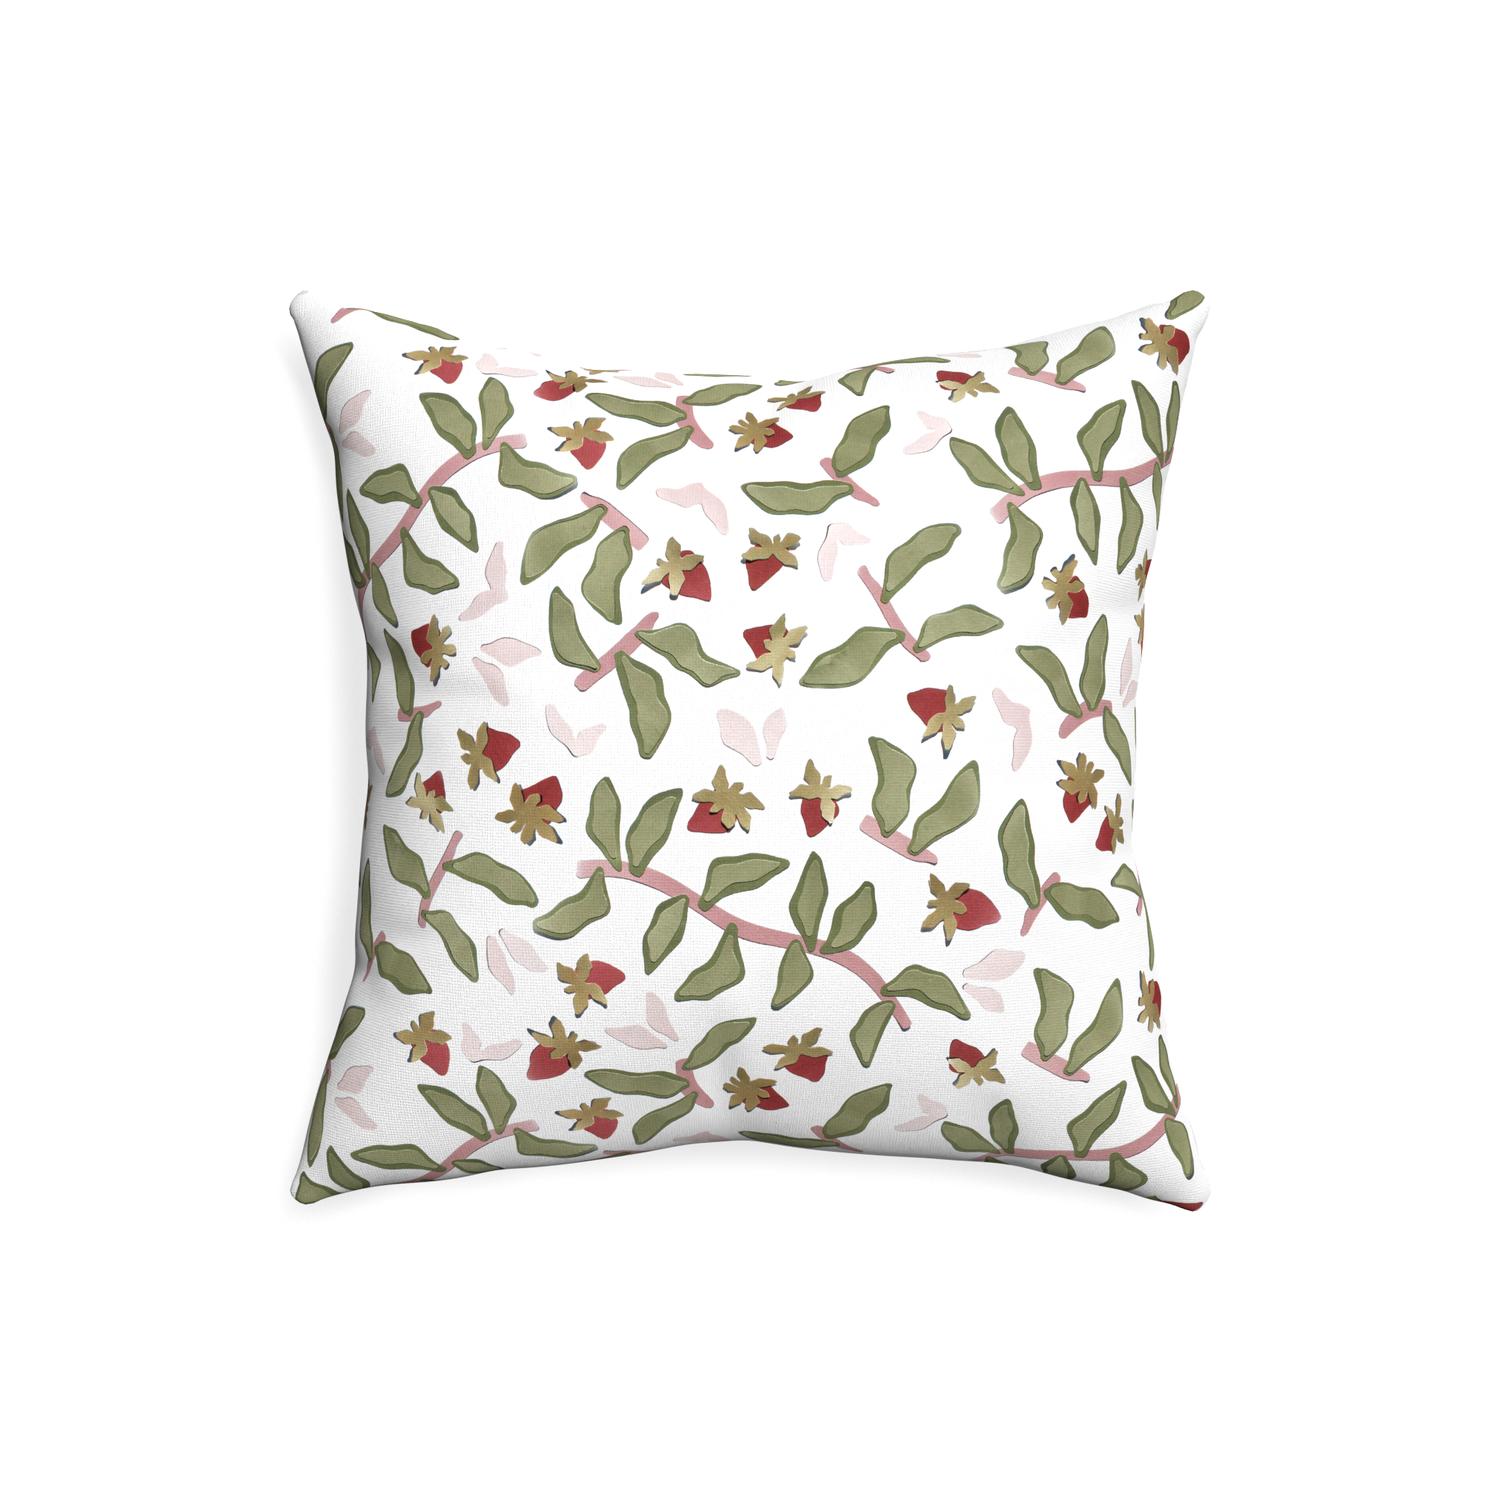 20-square nellie custom strawberry & botanicalpillow with none on white background